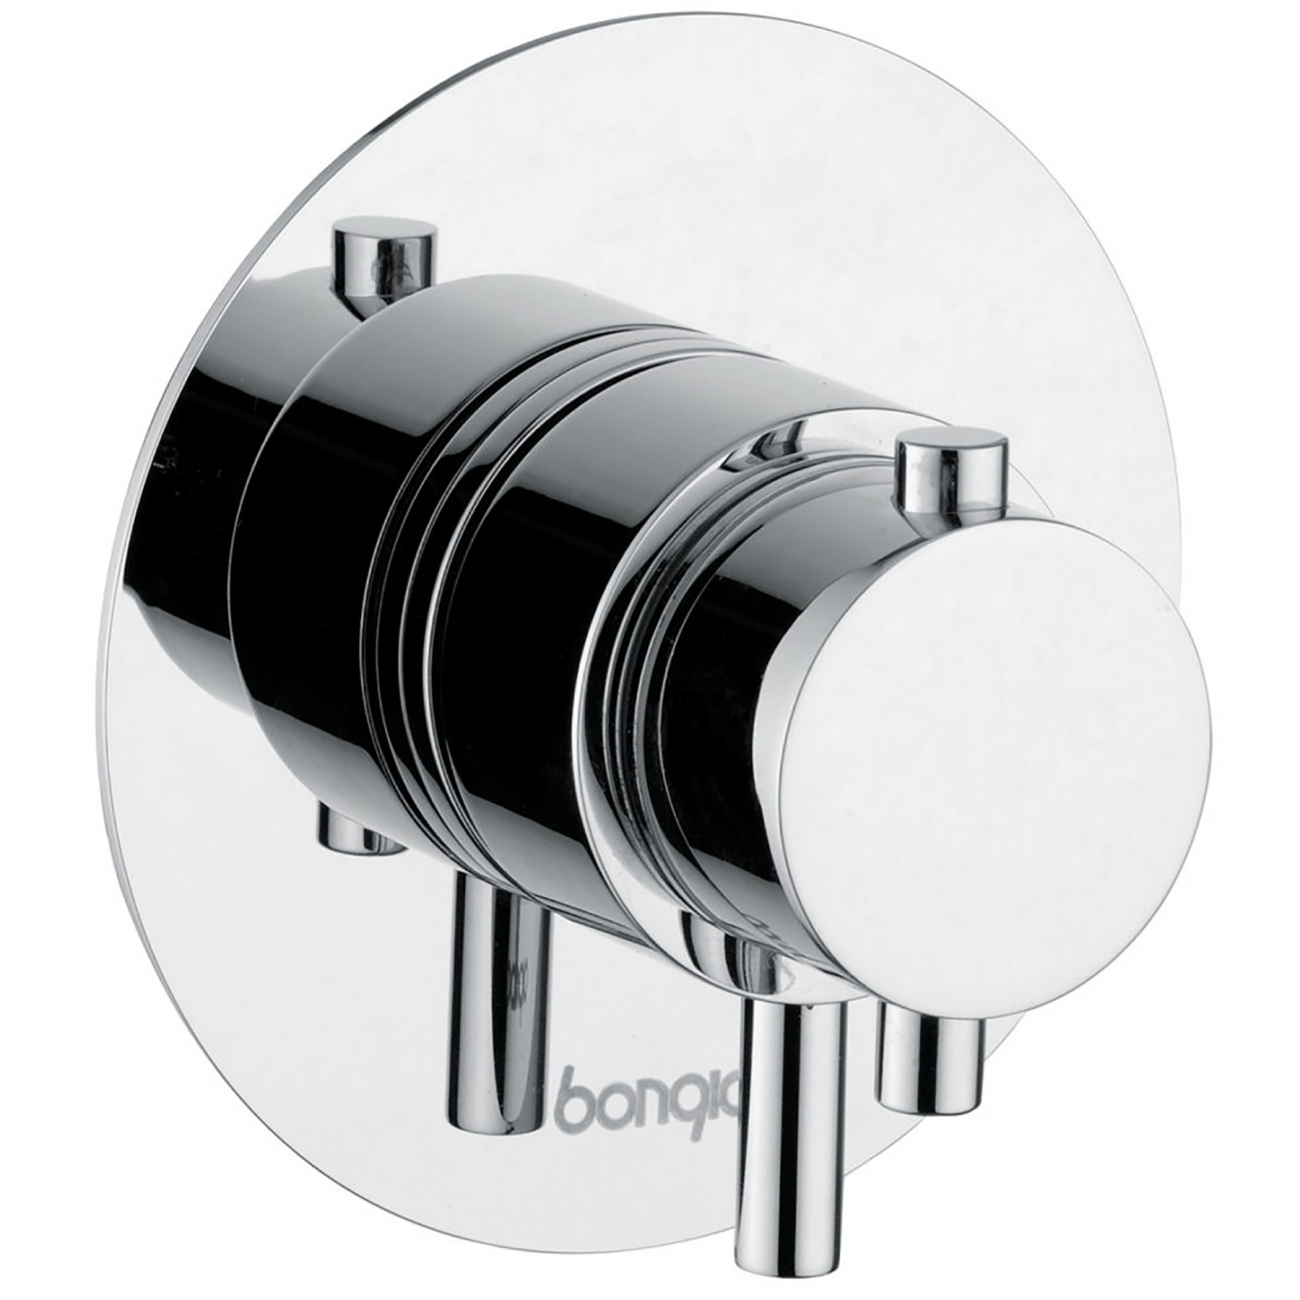 Bongio Project T.ube Wall Mounted Thermostatic Mixer